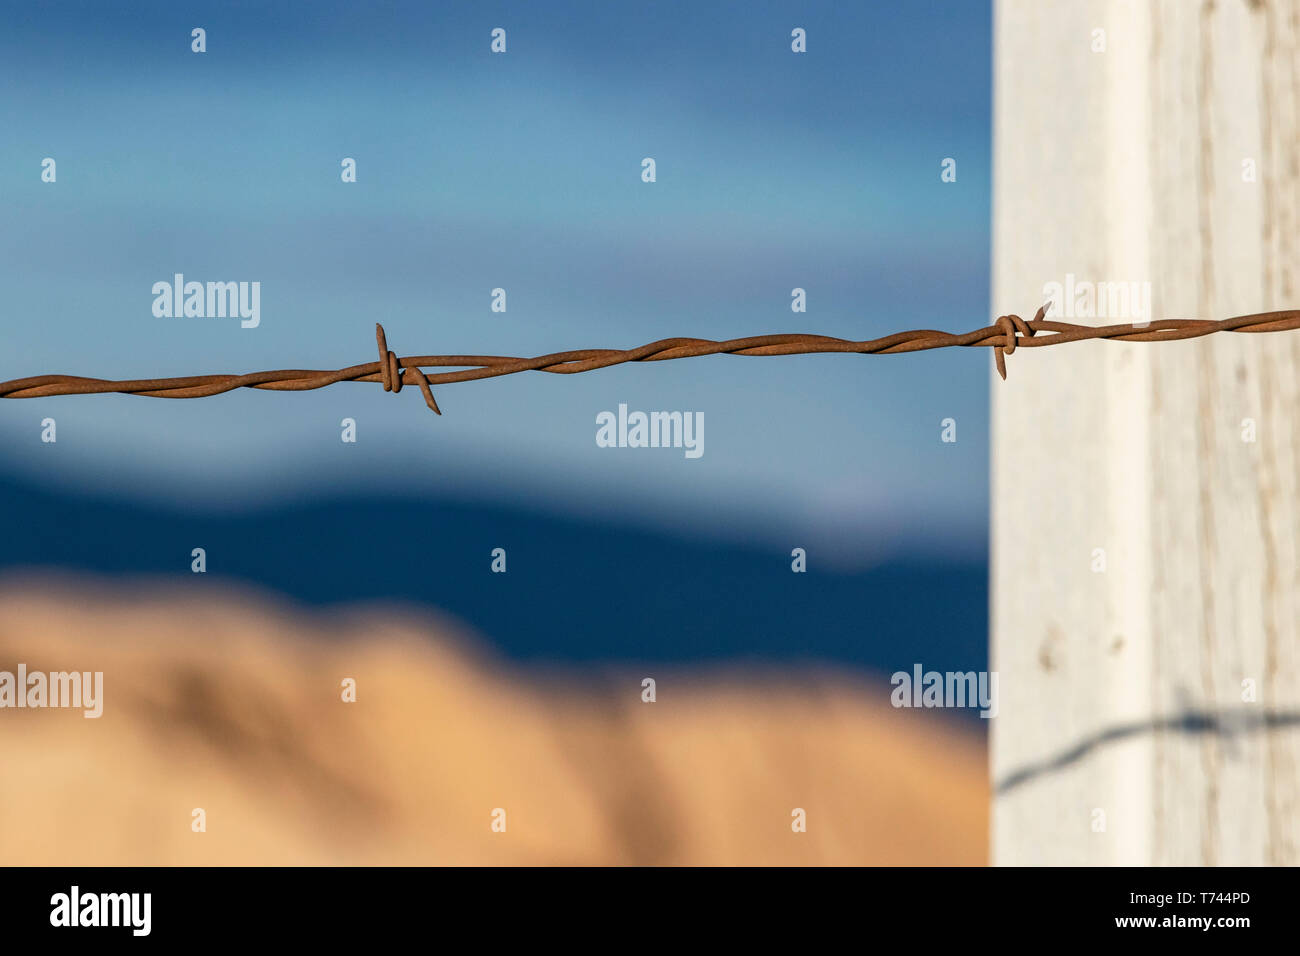 Close up view of rusty barbed wire fence against western backdrop Stock Photo